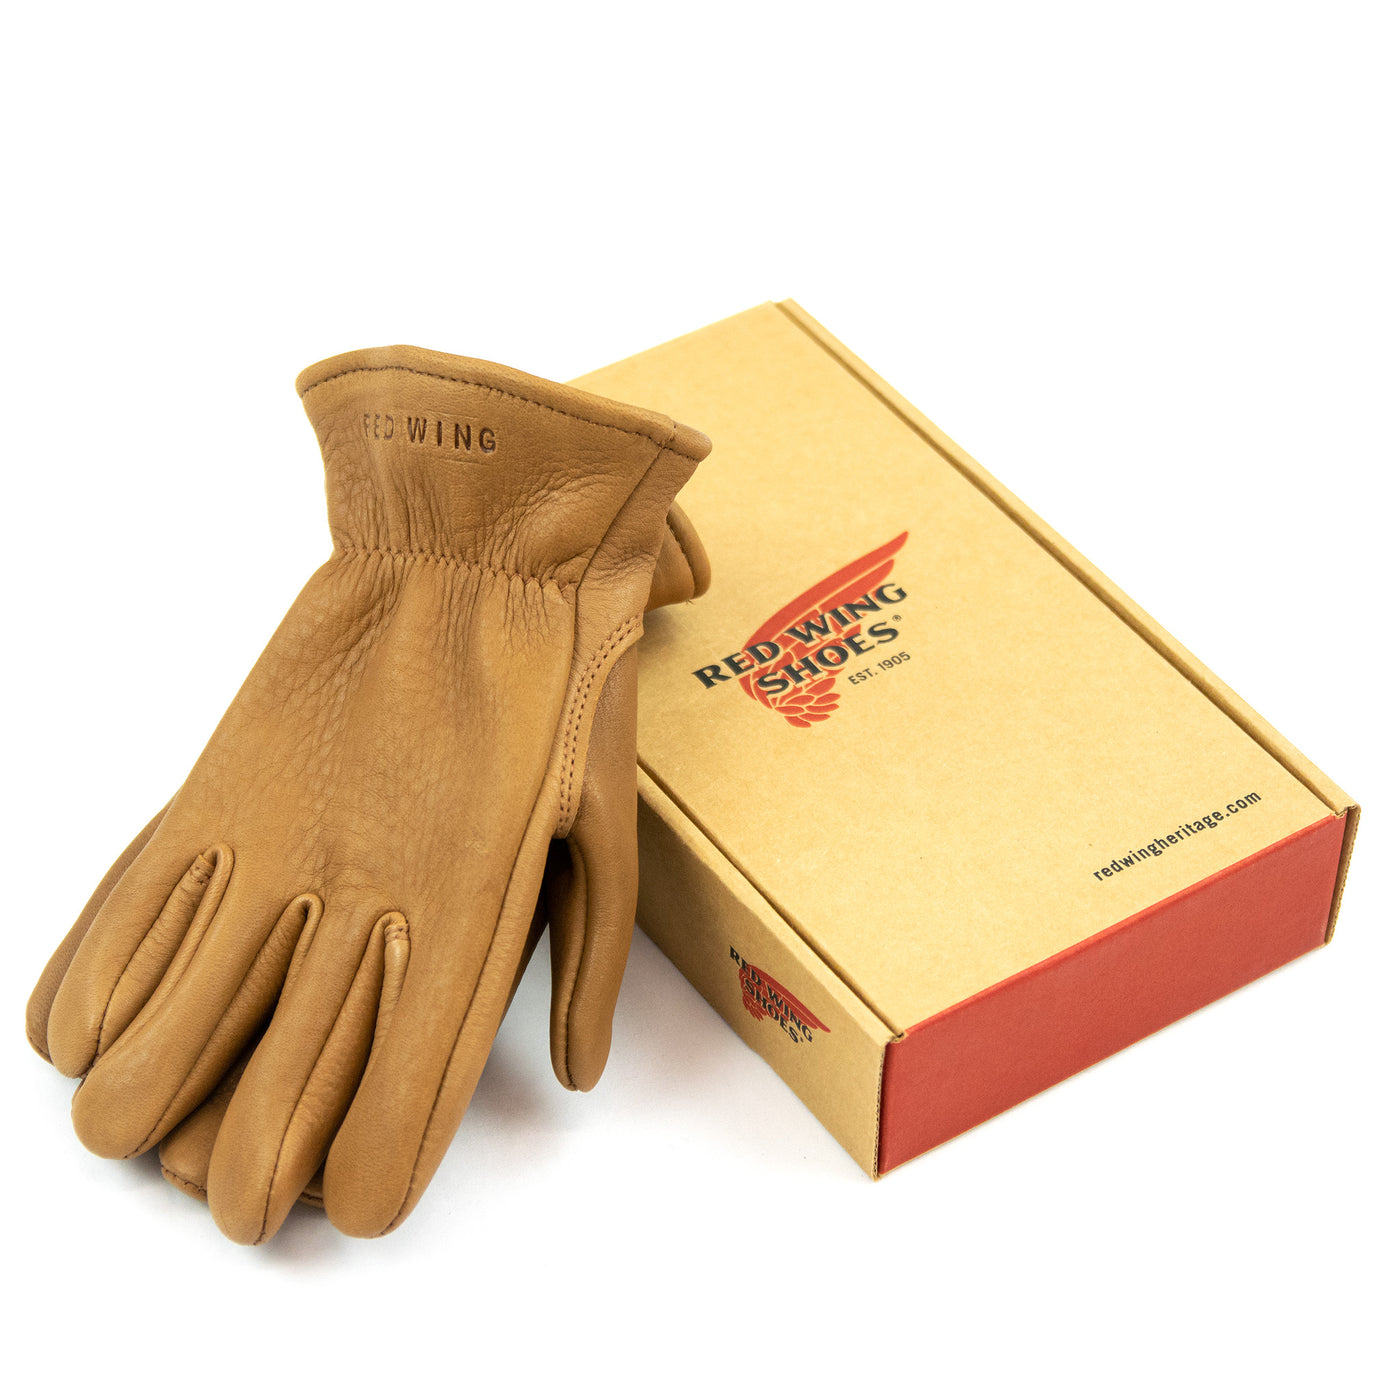 Red Wing Lined Buckskin Leather Gloves Nutmeg Made in USA Box